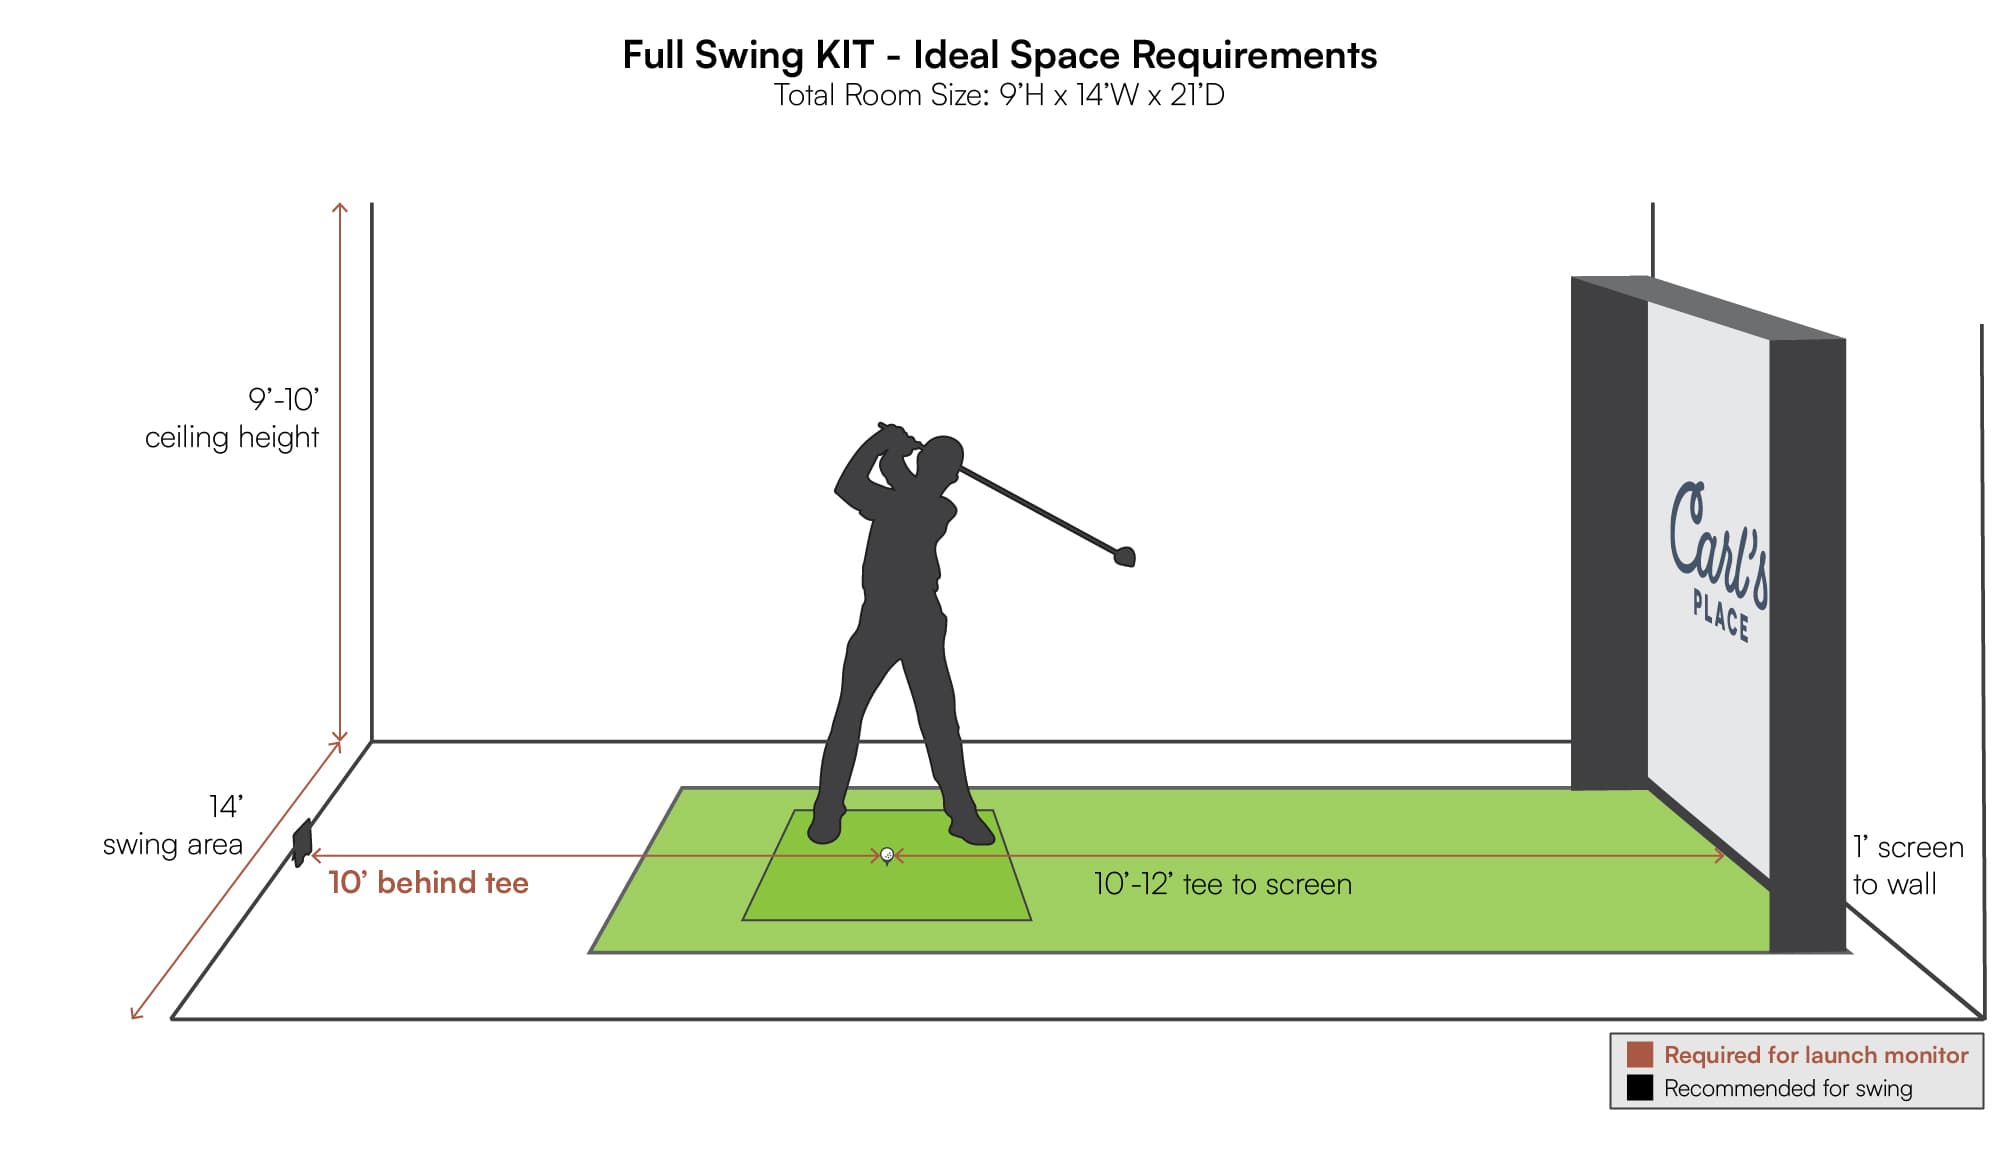 Full Swing KIT space requirements in golf simulator